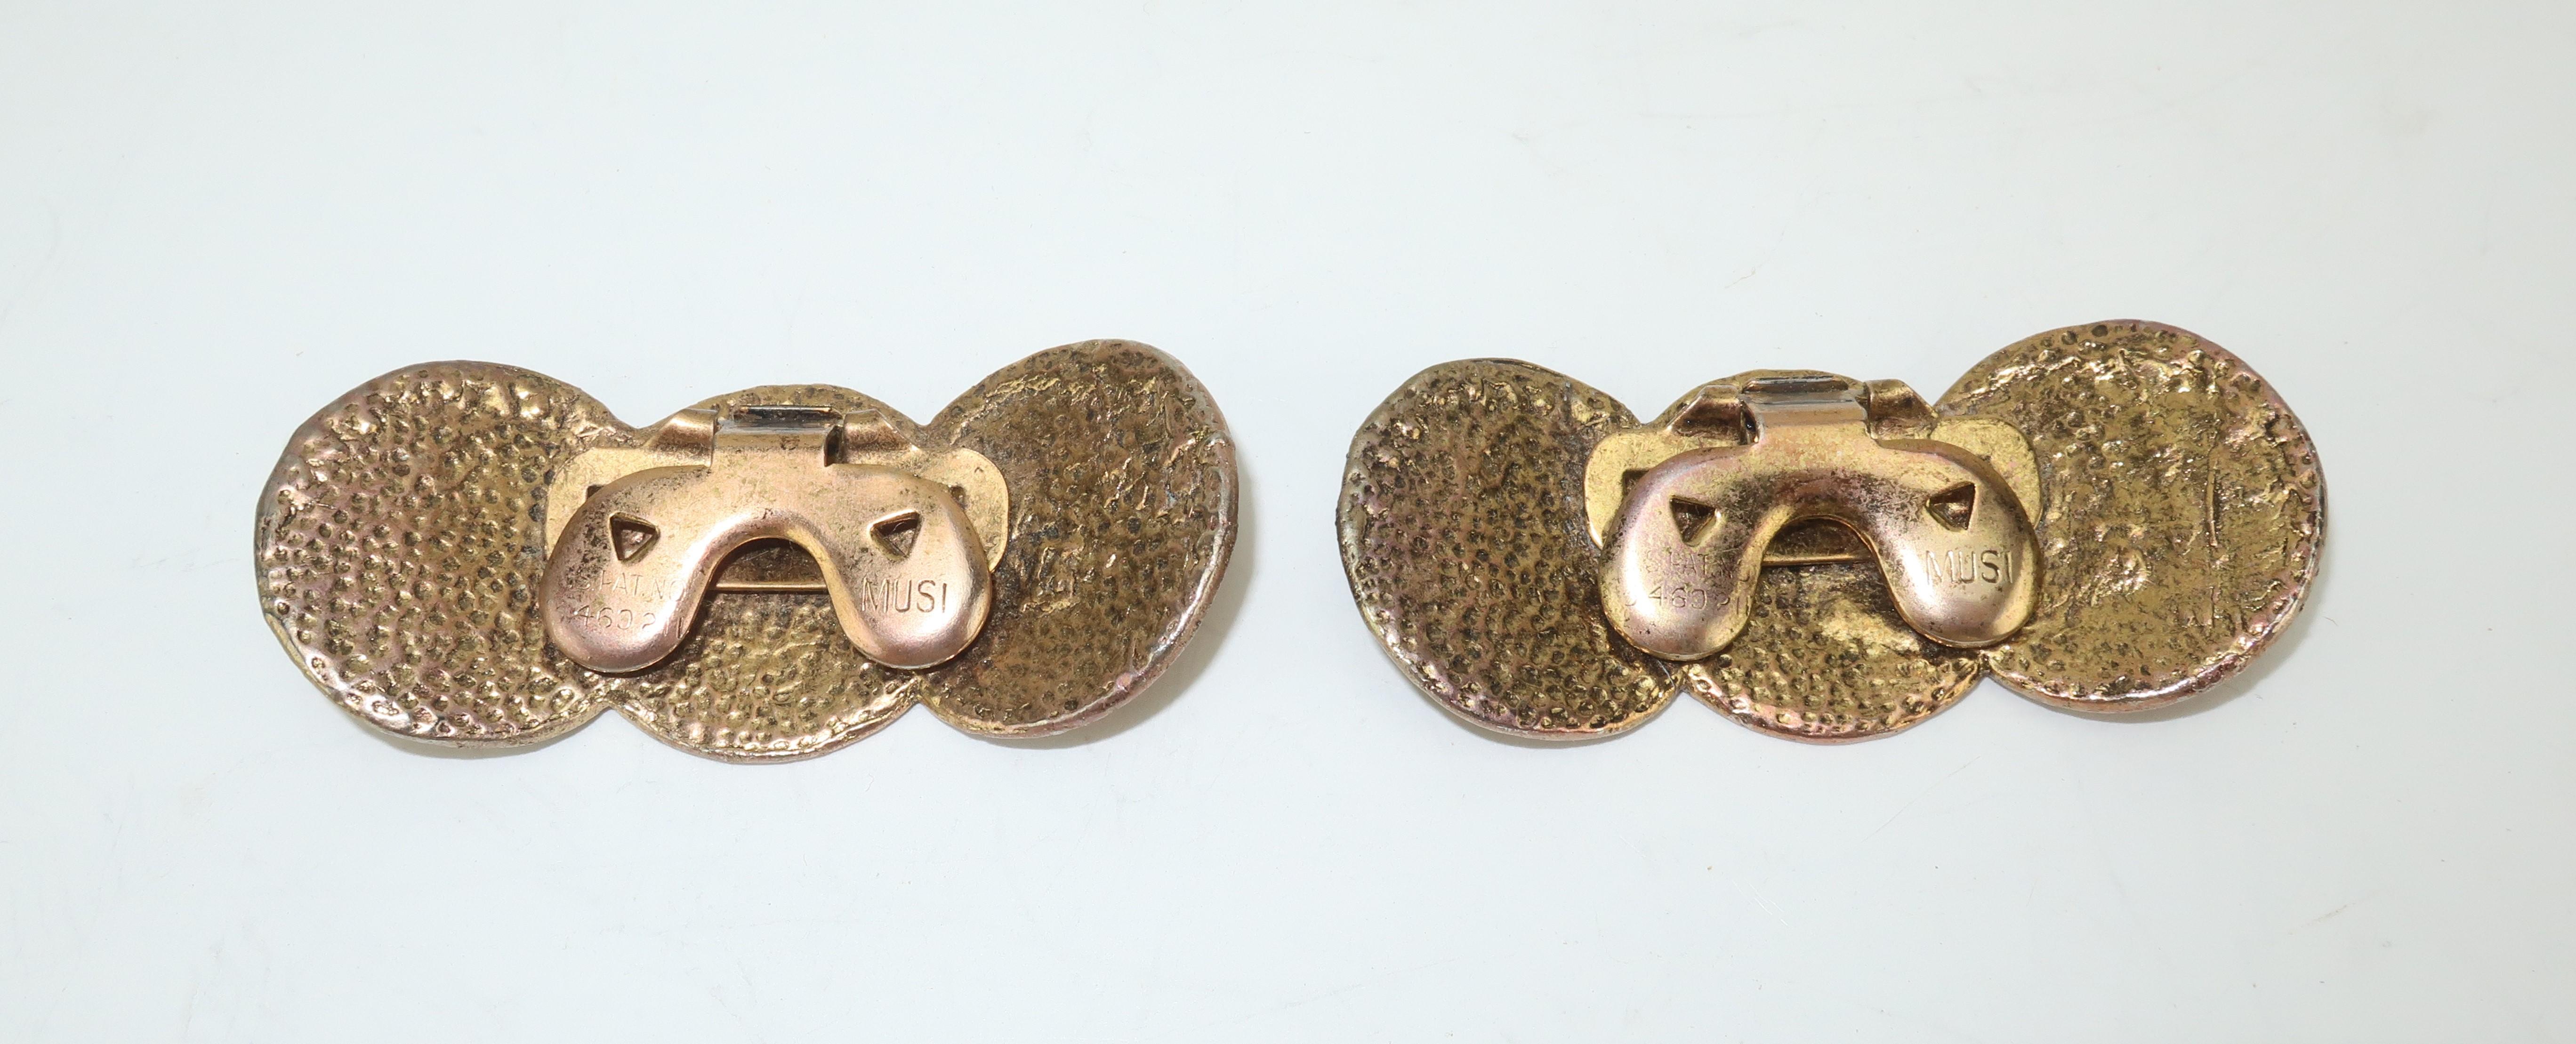 Brown C.1960 Musi Gold Tone Coin Shoe Clips